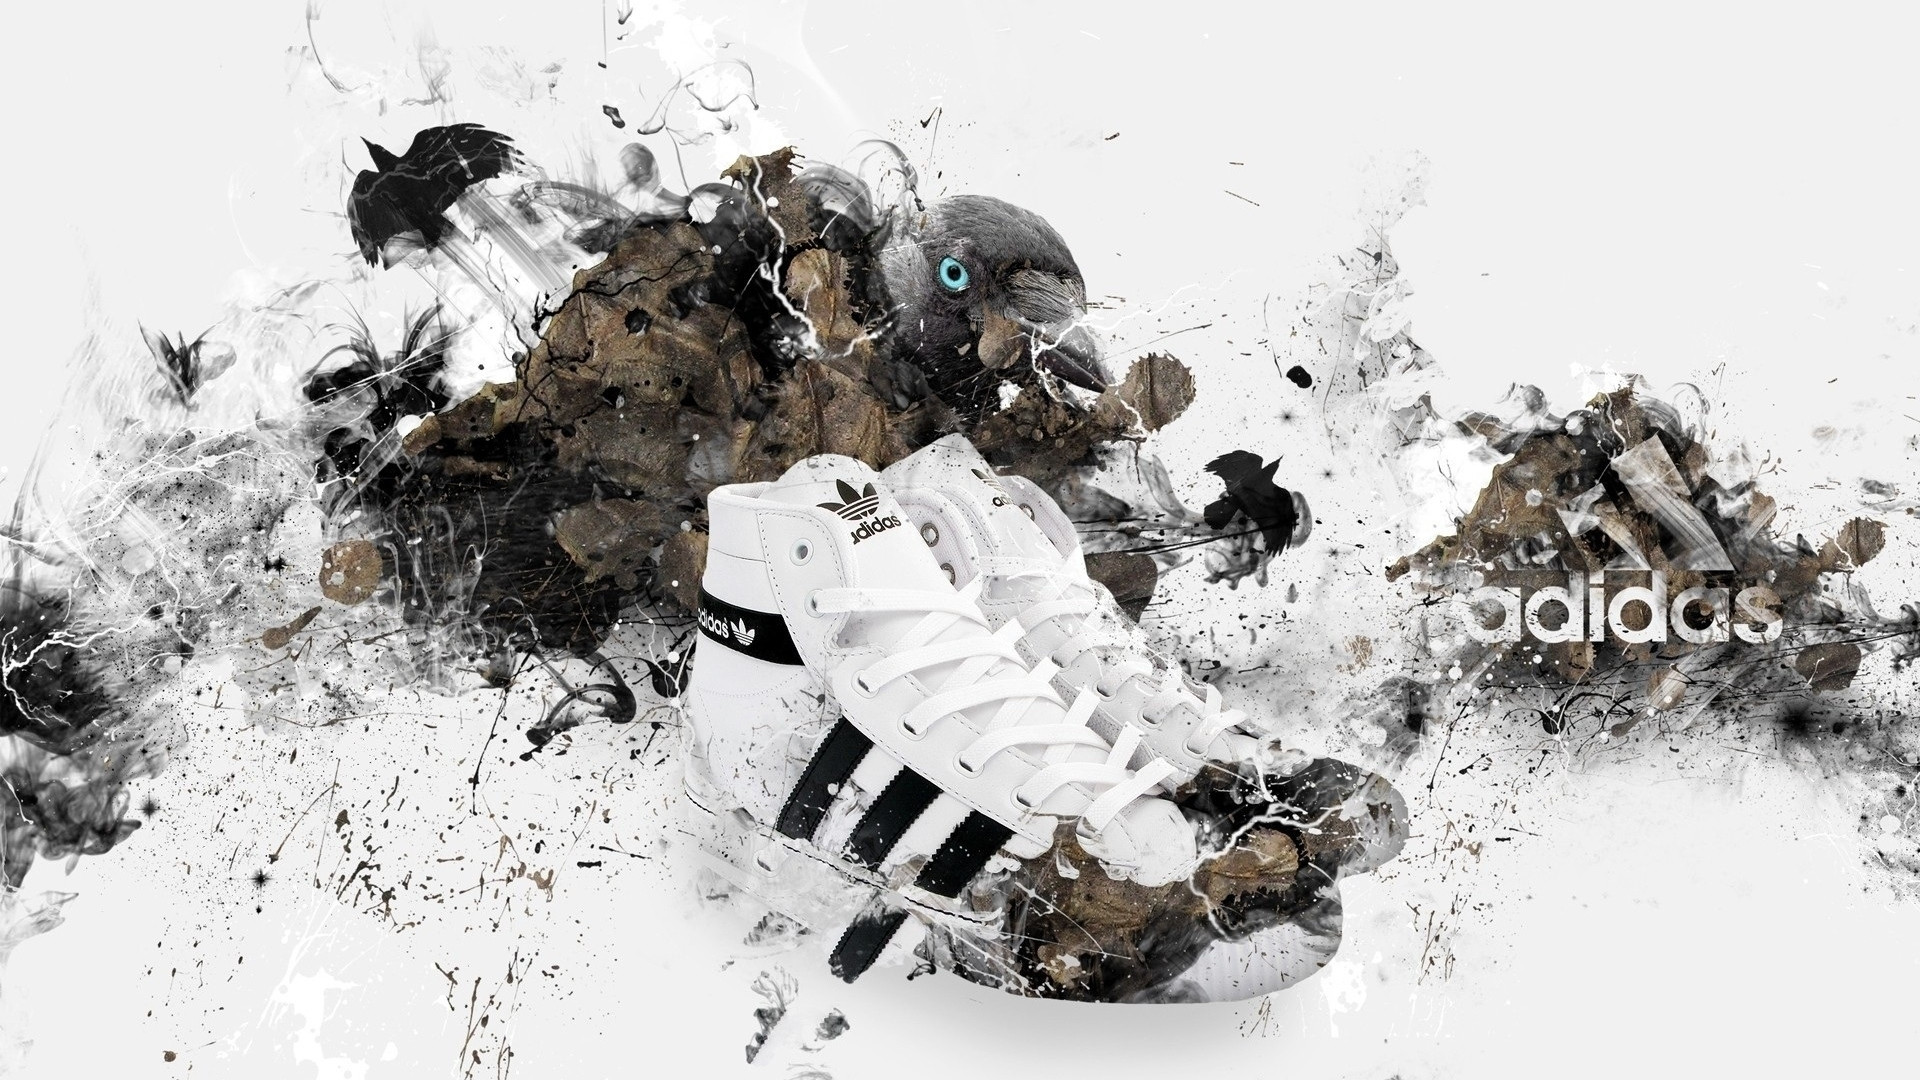 1920x1080  Wallpaper adidas, sneakers, shoes, sport, paint